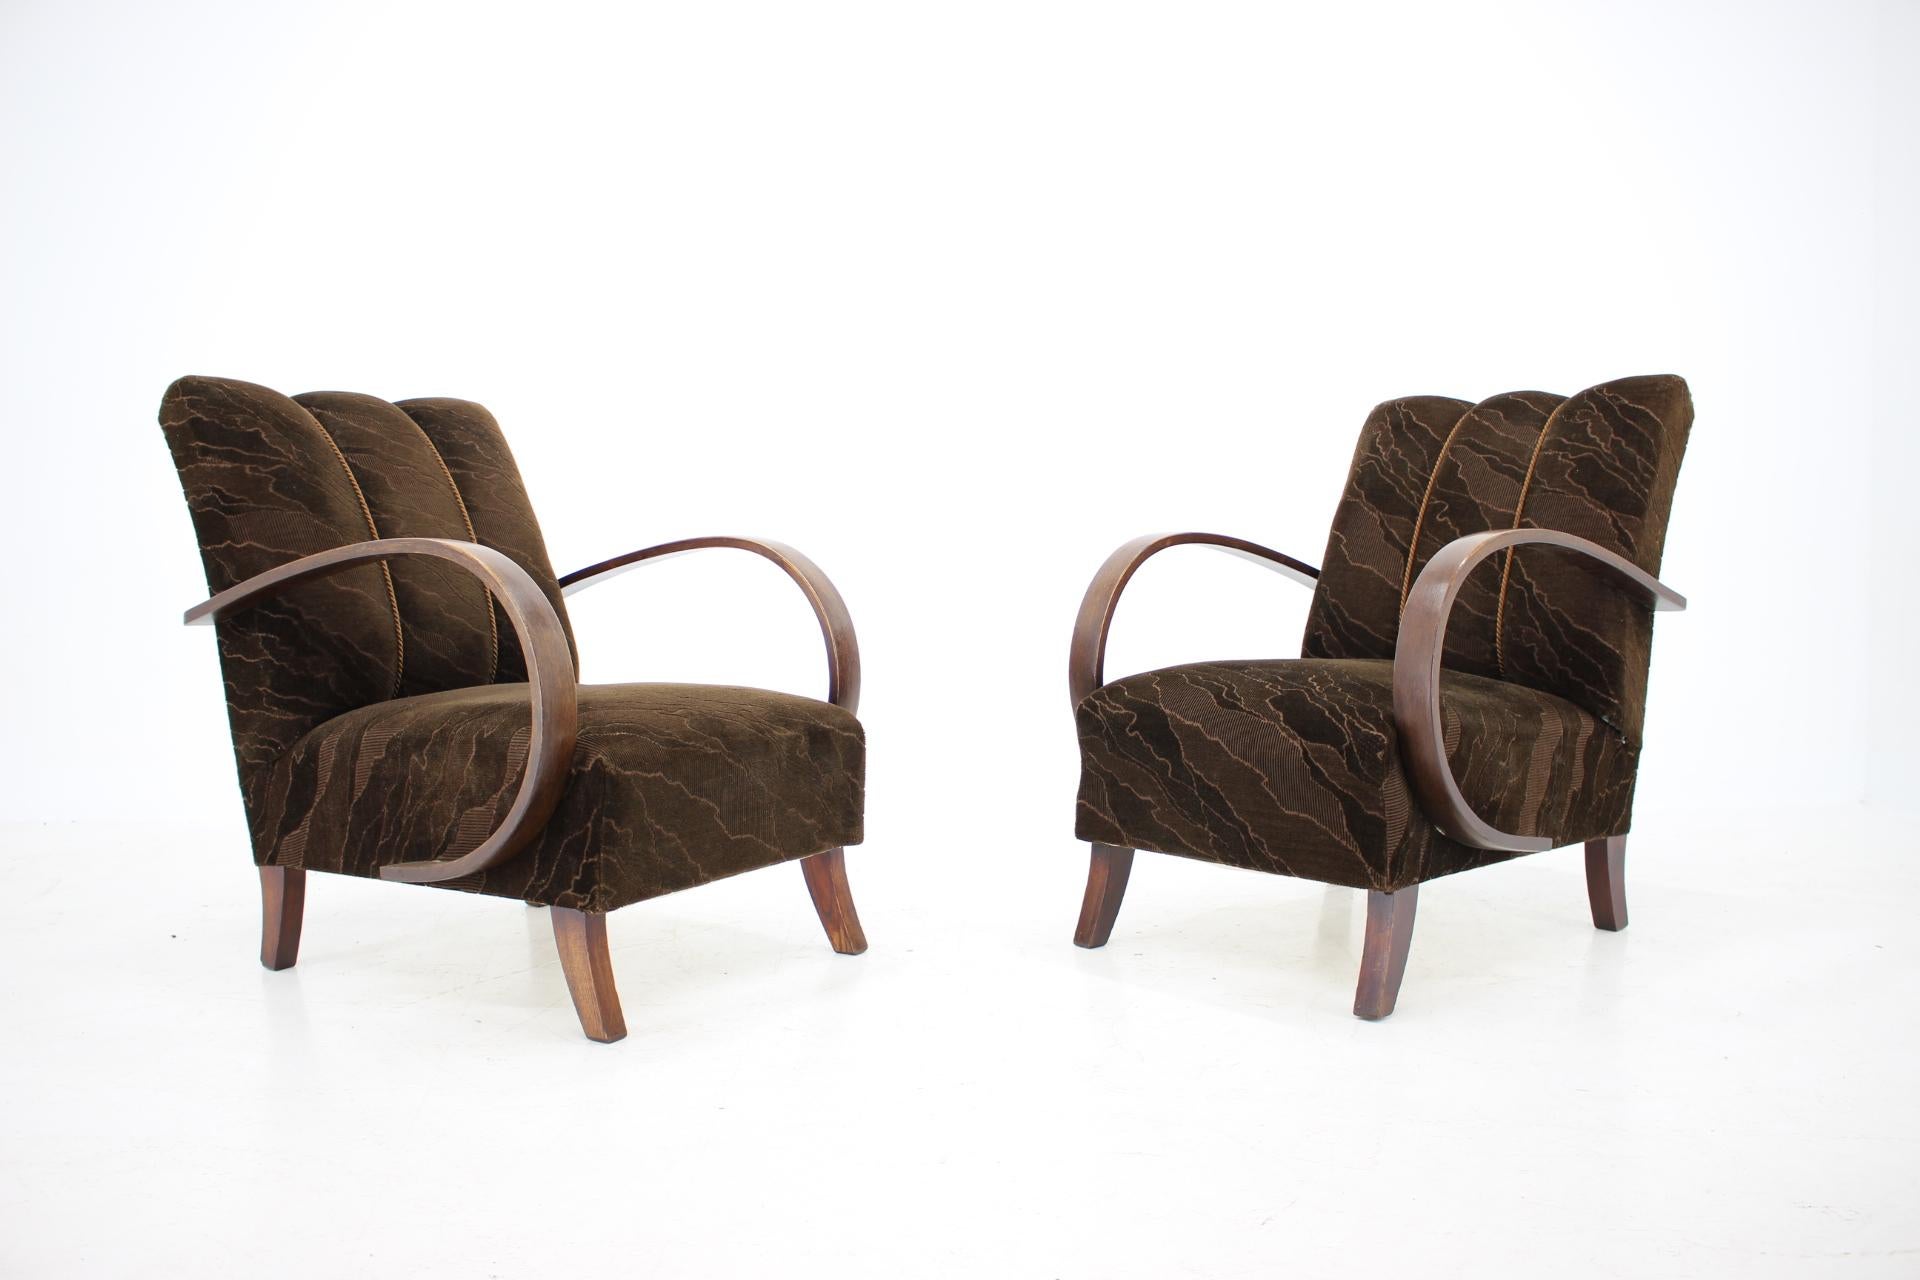 - Made in Czechoslovakia
- Made of beechwood, fabric
- Wooden parts restored
- New upholstery few years ago.
 